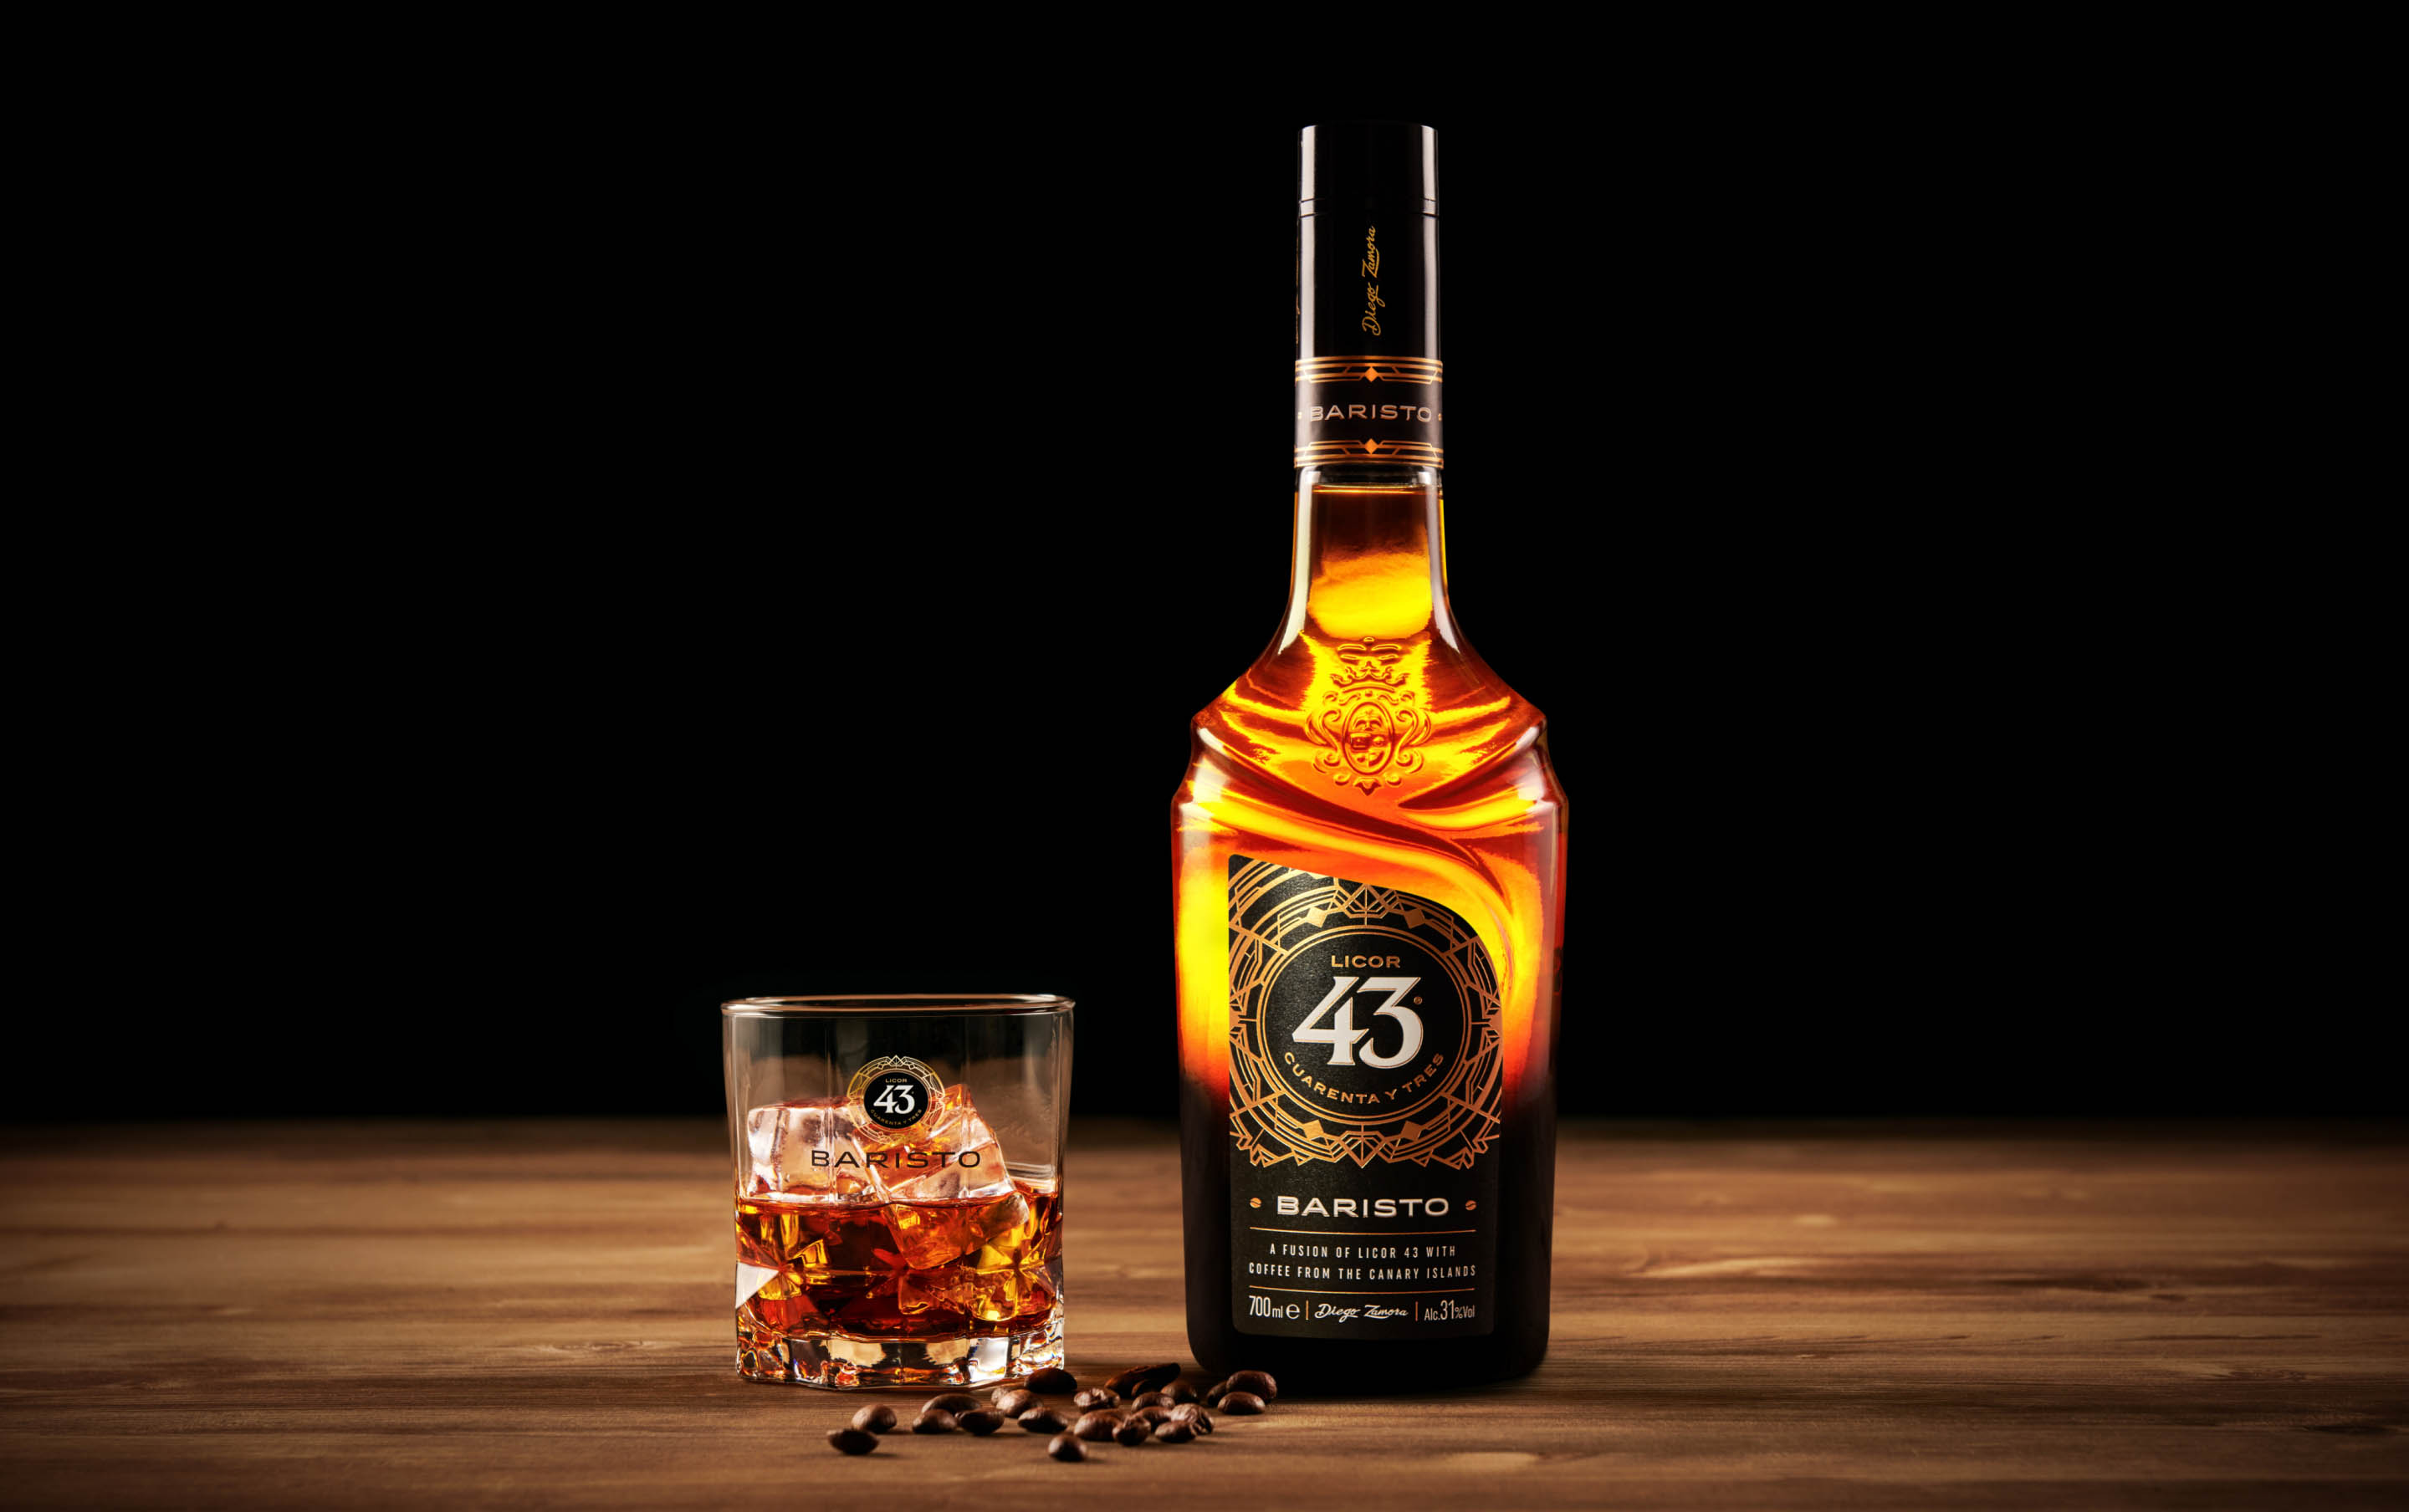 Licor 43 is the pride of the Zamora Company: a family recipe that became the Spanish liqueur with the greatest international reach. With the European market in mind, they created a special edition: Licor 43 Baristo, which included notes of coffee from Agaete, in the Canary Islands, in its legendary recipe. The essence of Spanish coffee culture, infused in a bottle.   
